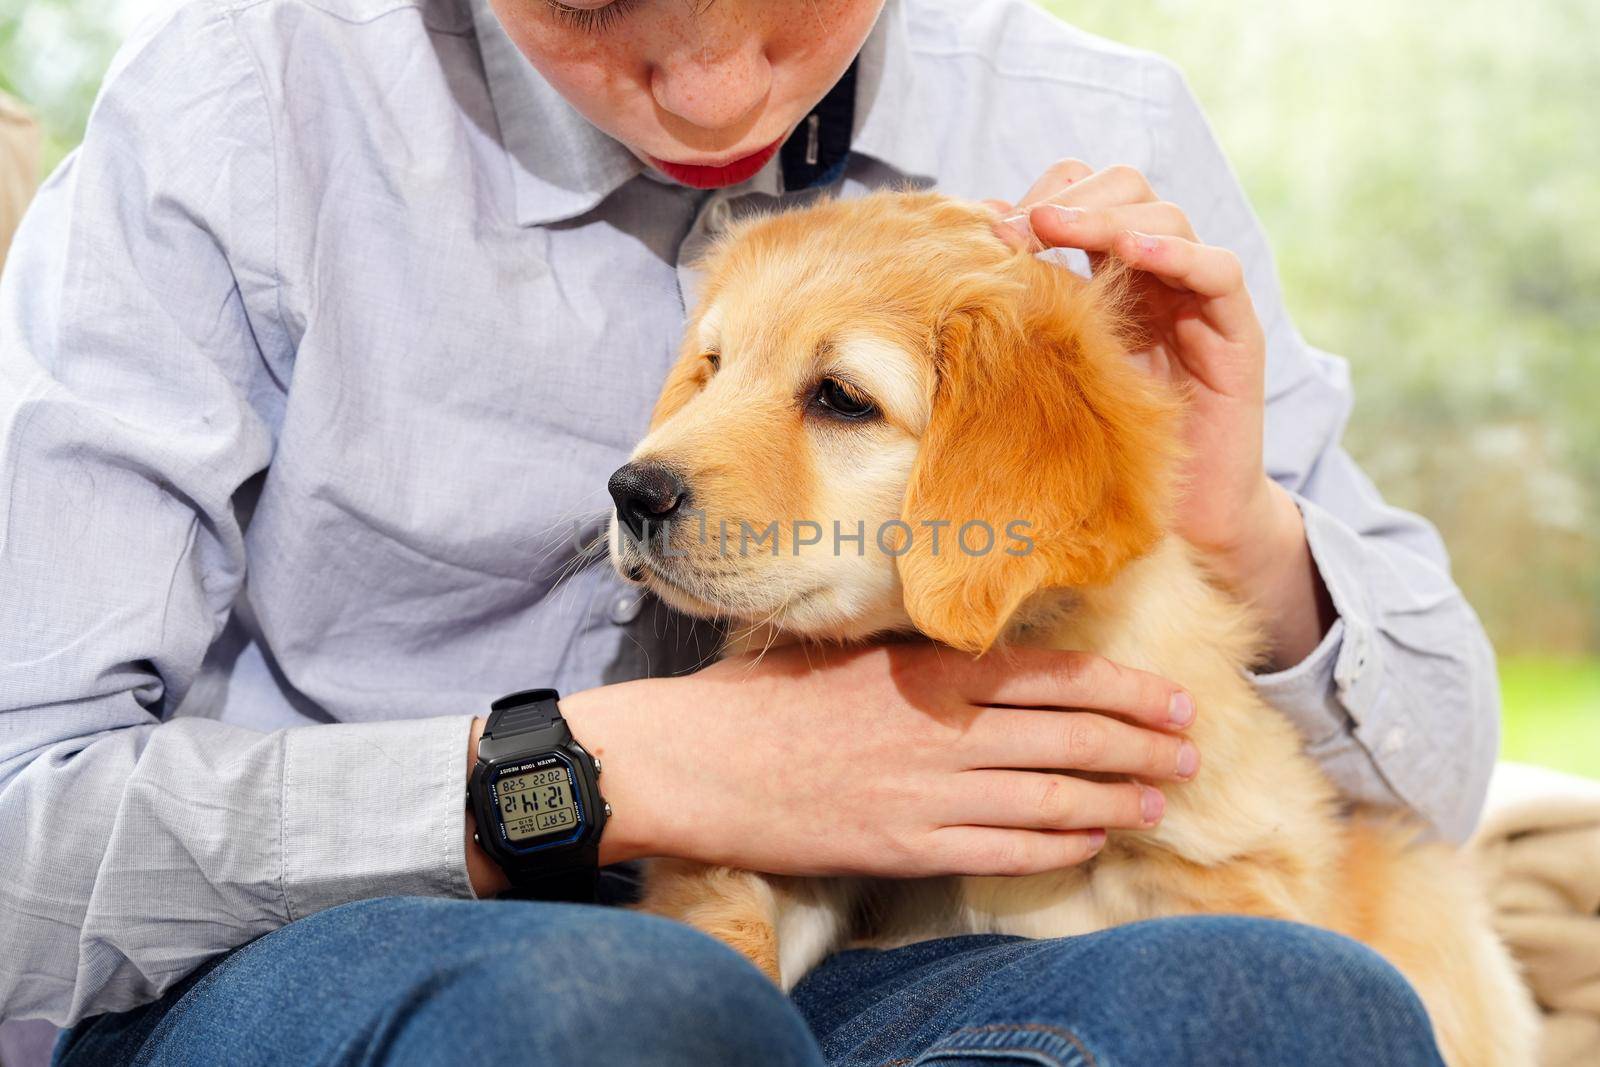 Happy cute puppy resting in the arms of a child, a dream come true. Portrait of cute puppy by PhotoTime